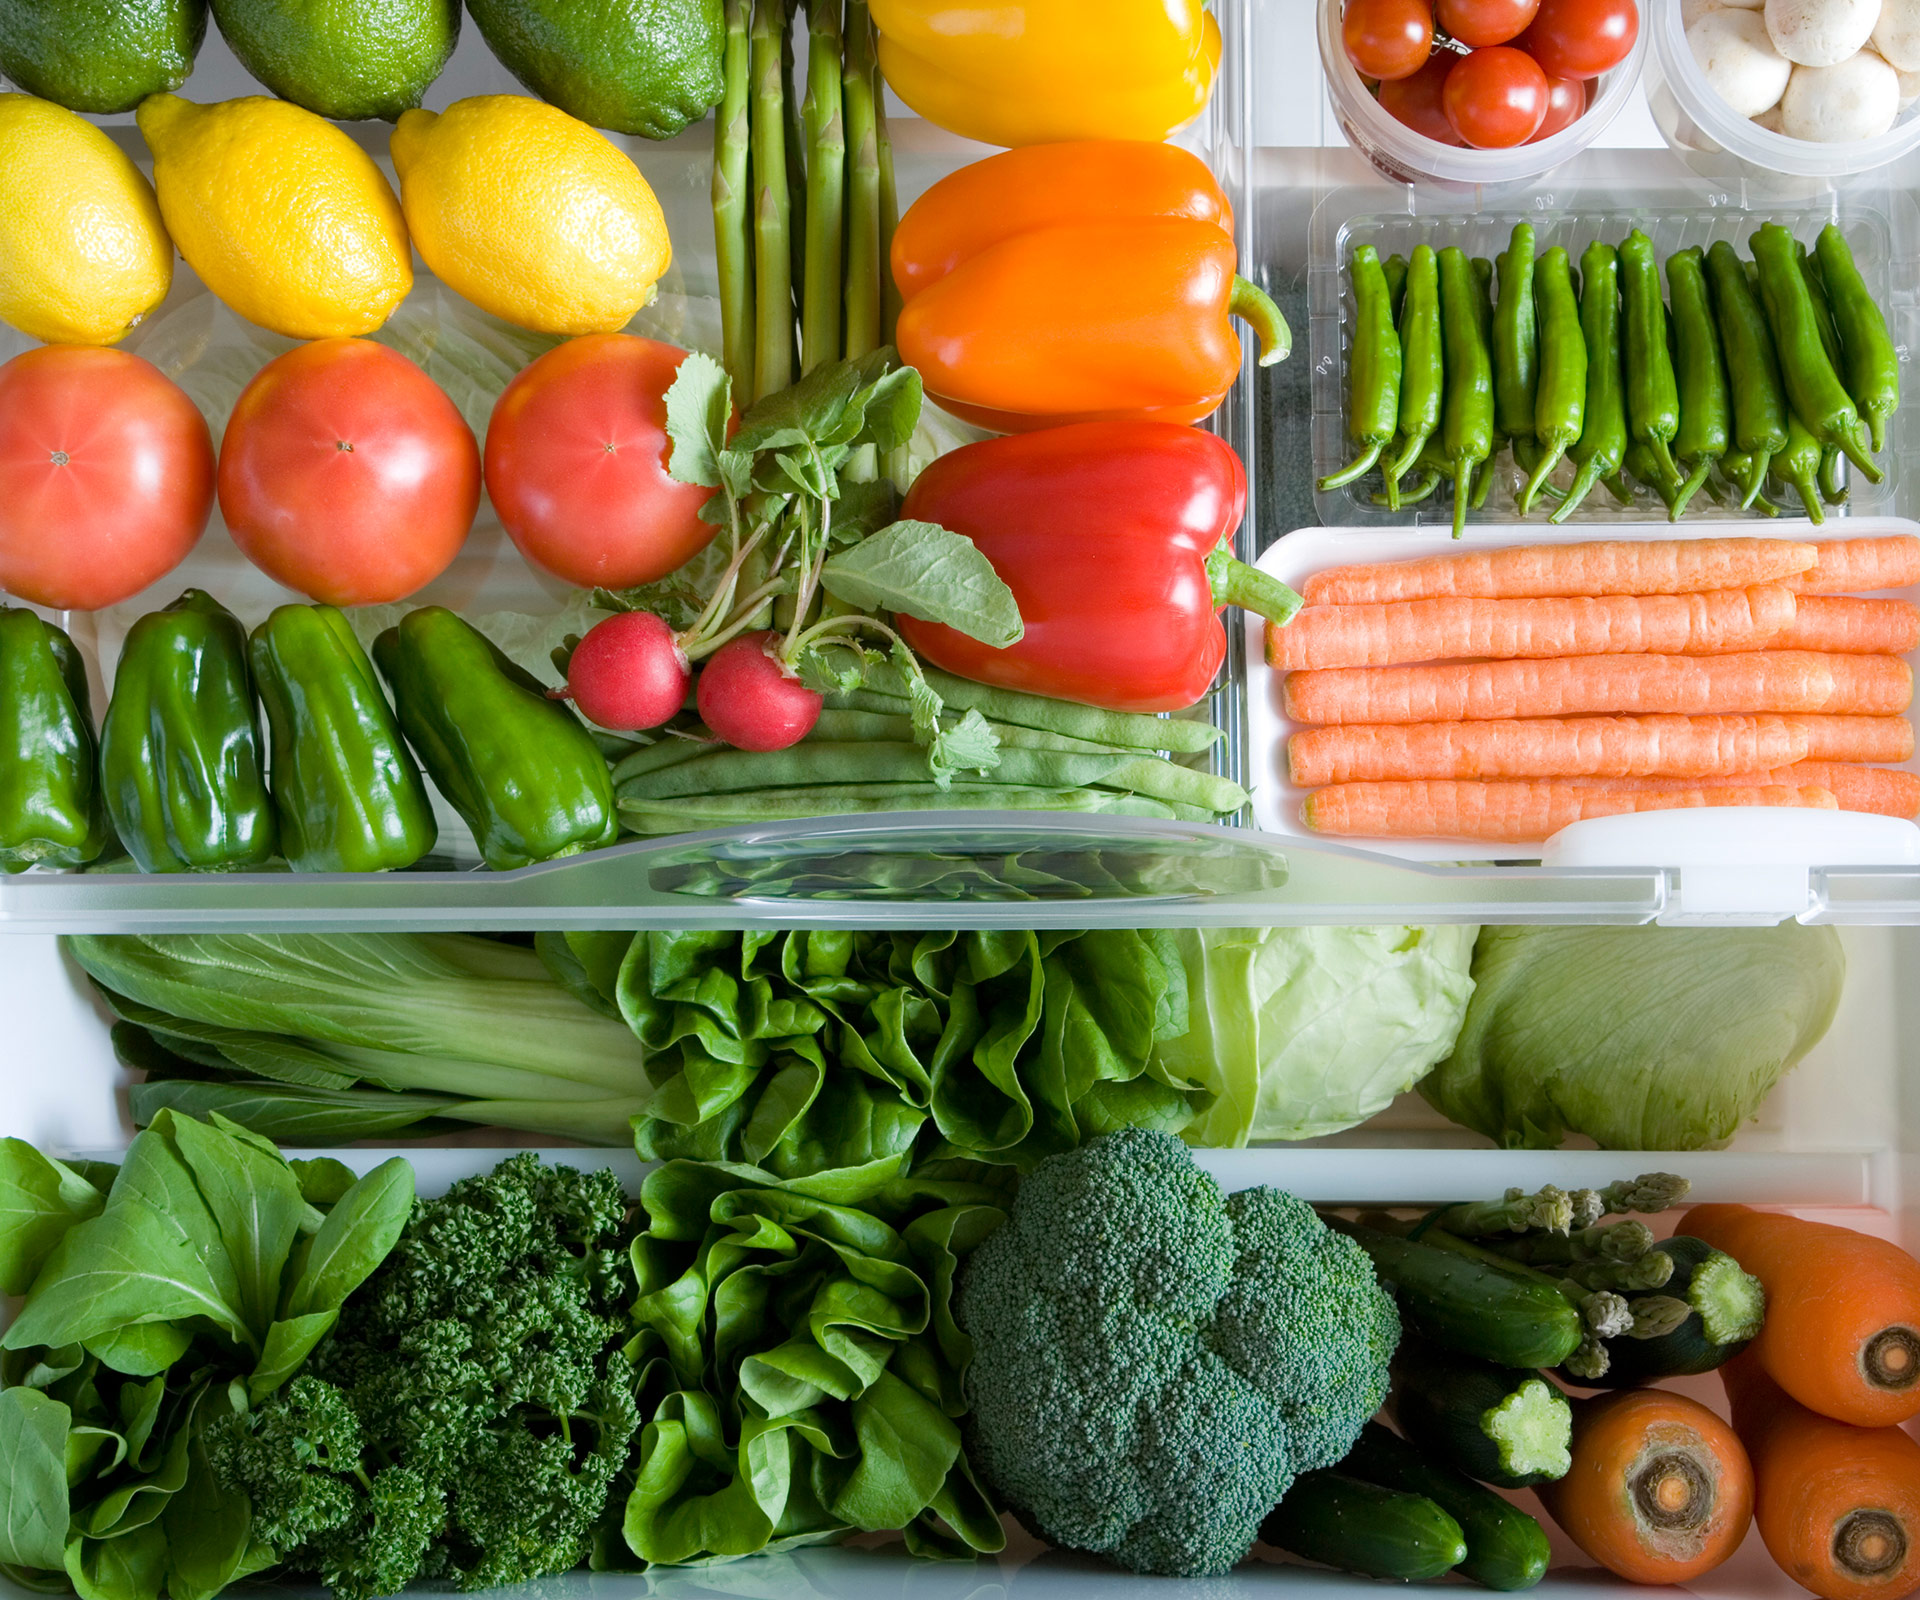 Salad drawer dangers… Is your fridge making you sick?